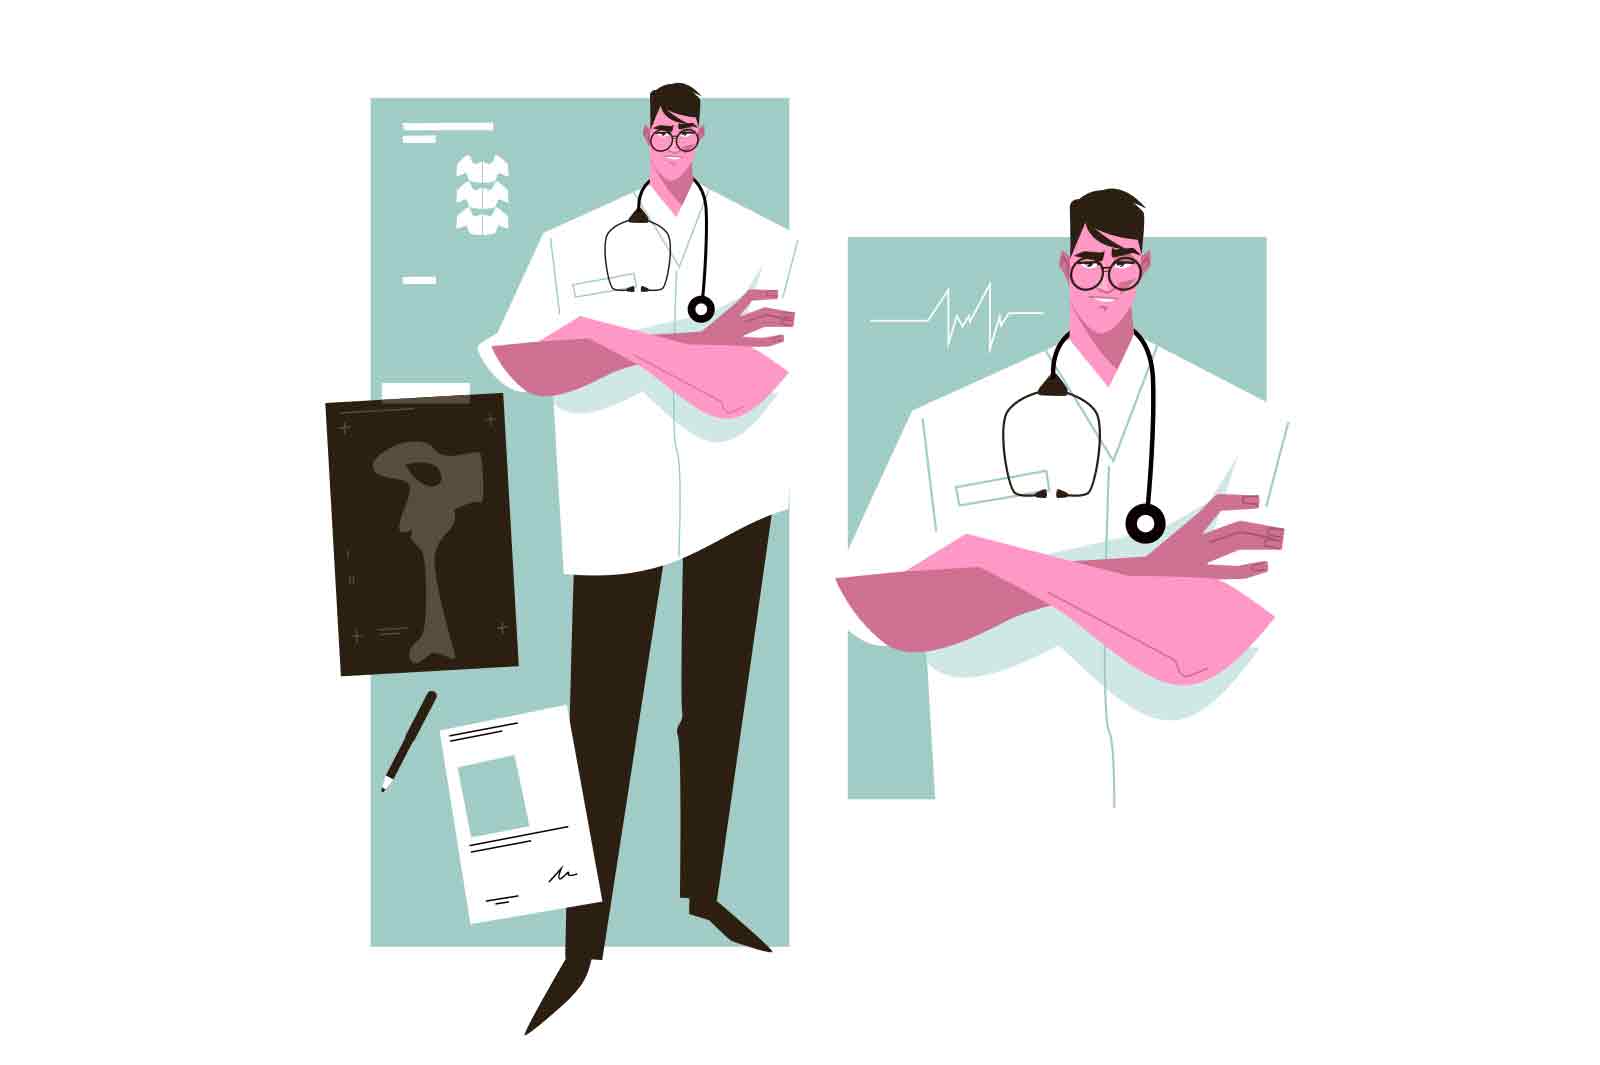 Man doctor with stethoscope and xray picture, vecto rillustration. Medicine and treatment concept.